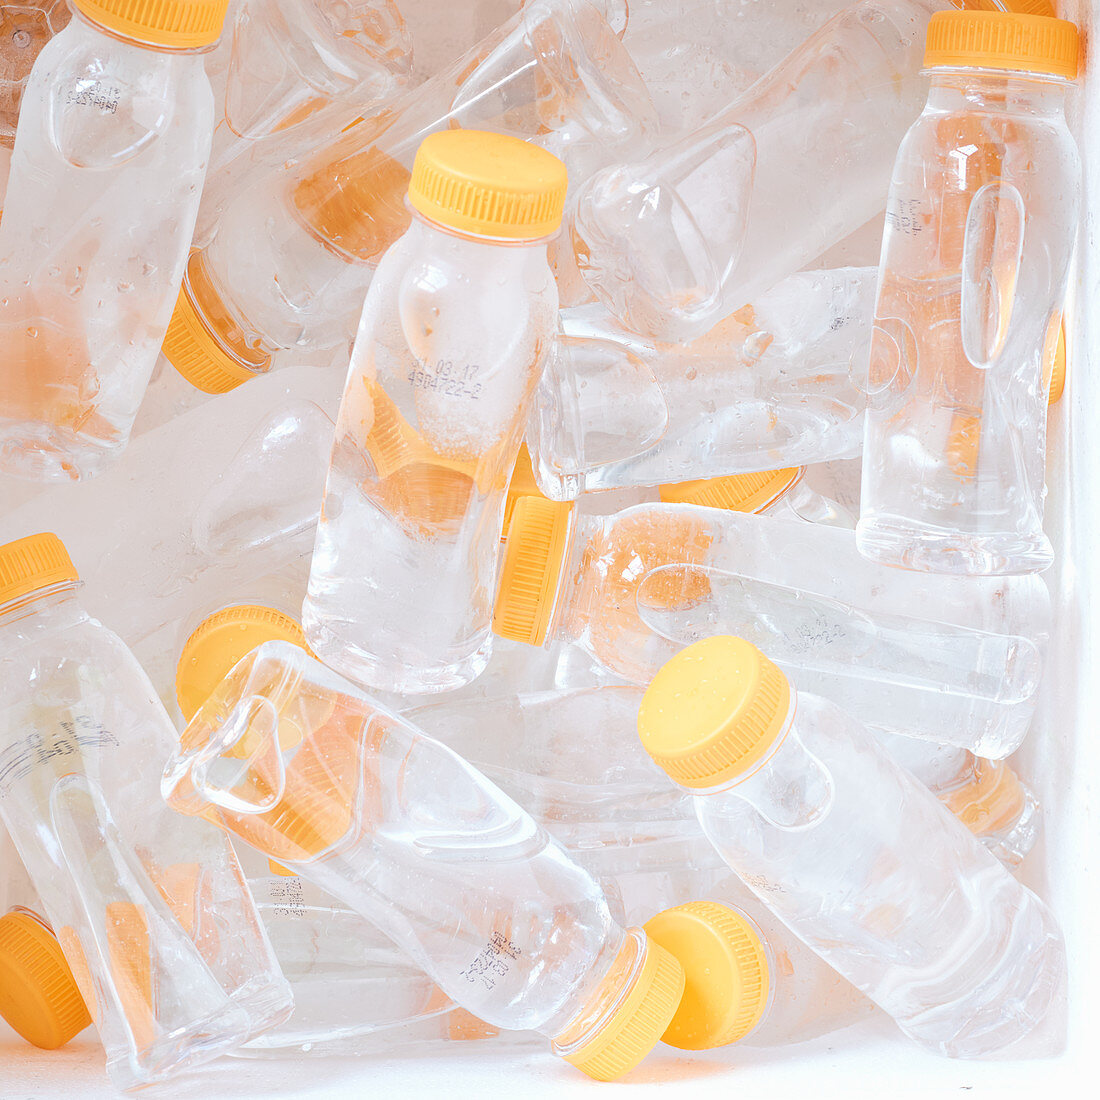 Chilled plastic water bottles